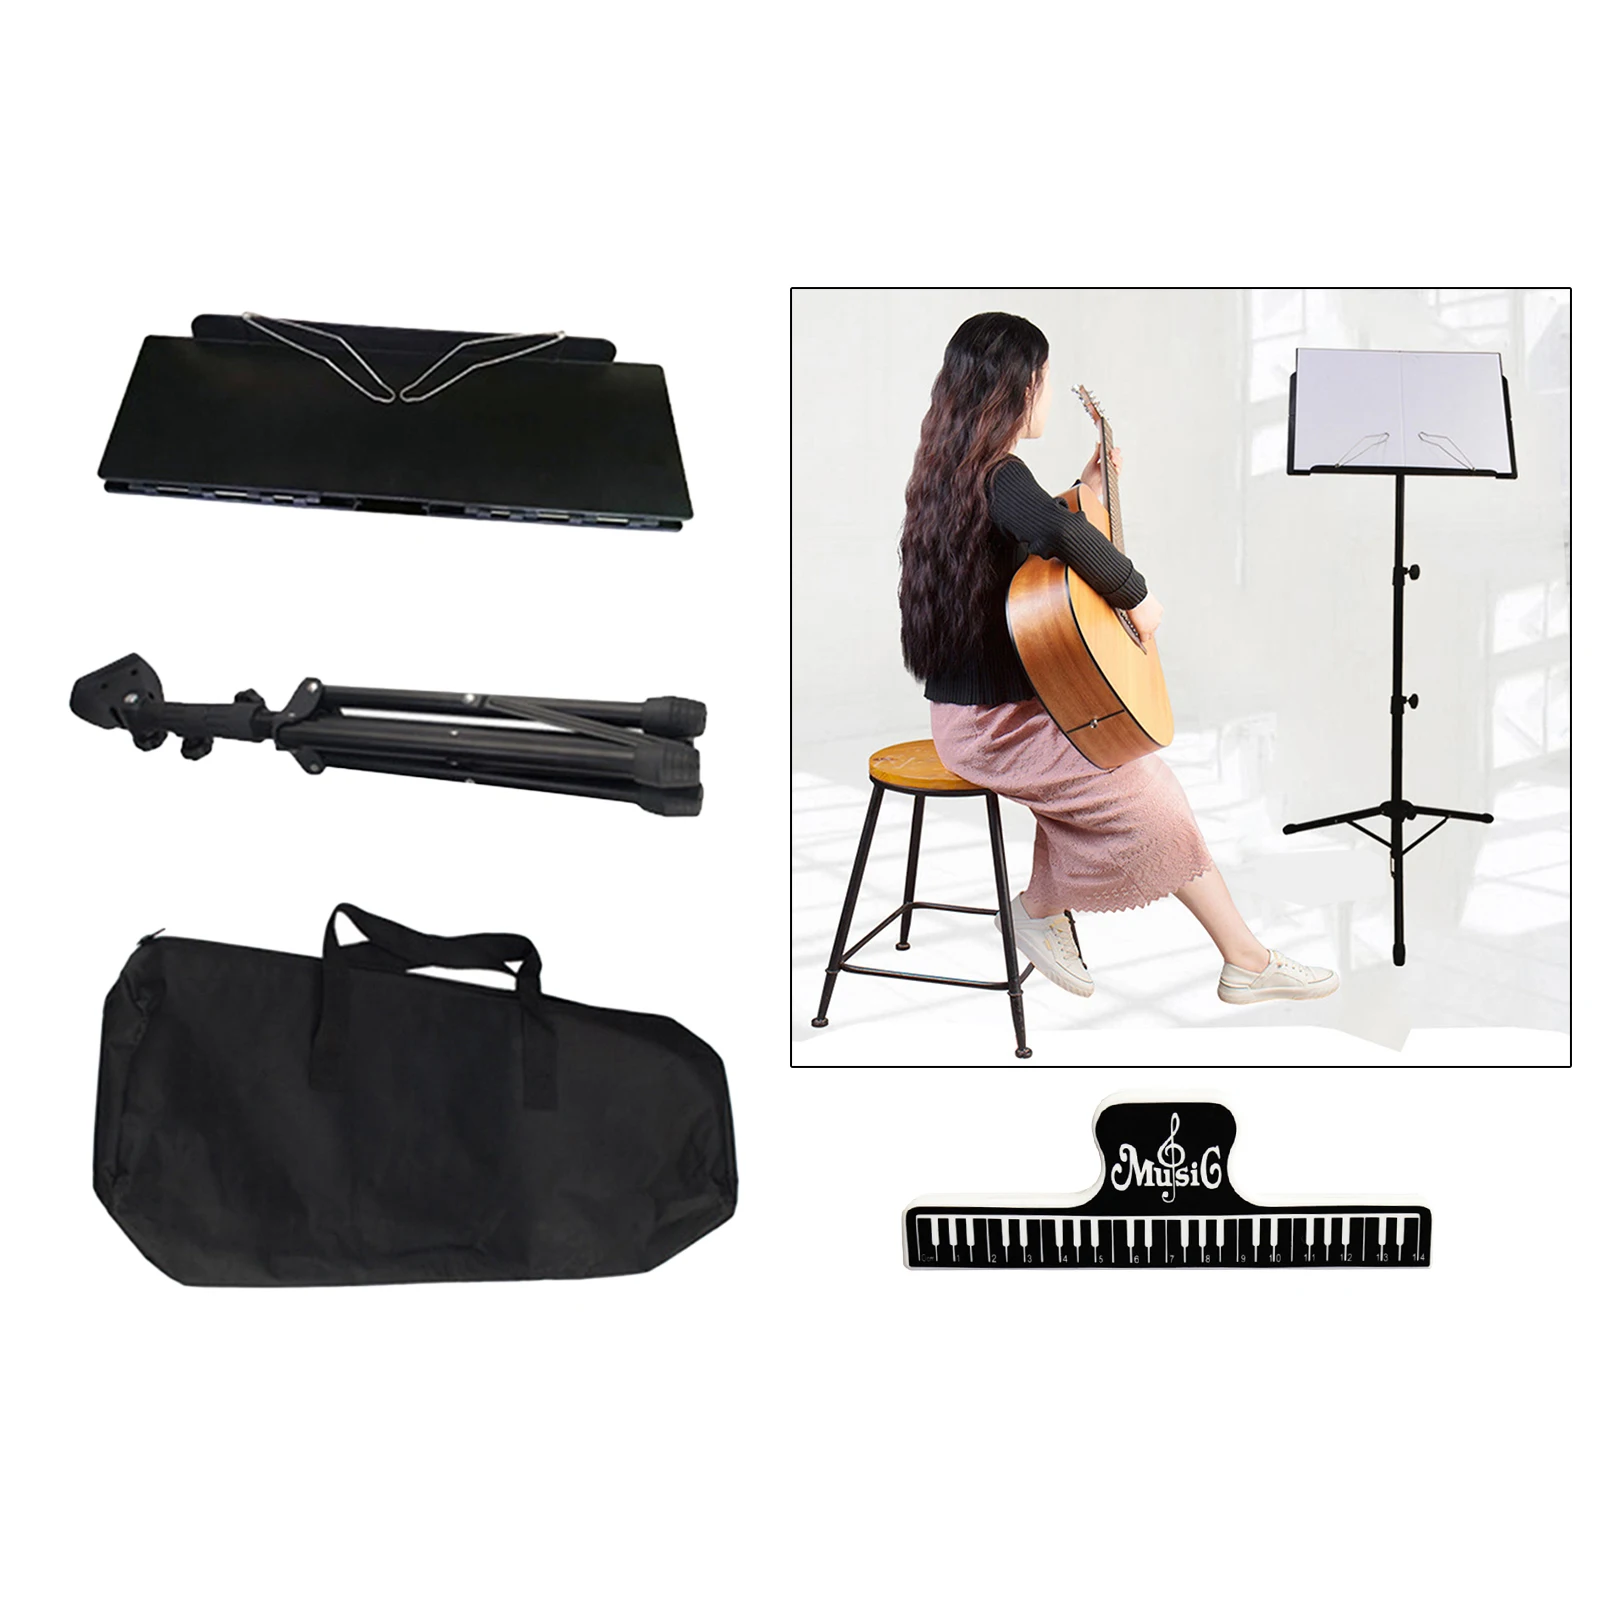 Professional Sheet Music Stand Height Tripod Base Lightweight Compact Easy and Convenient to Carry Height from 26